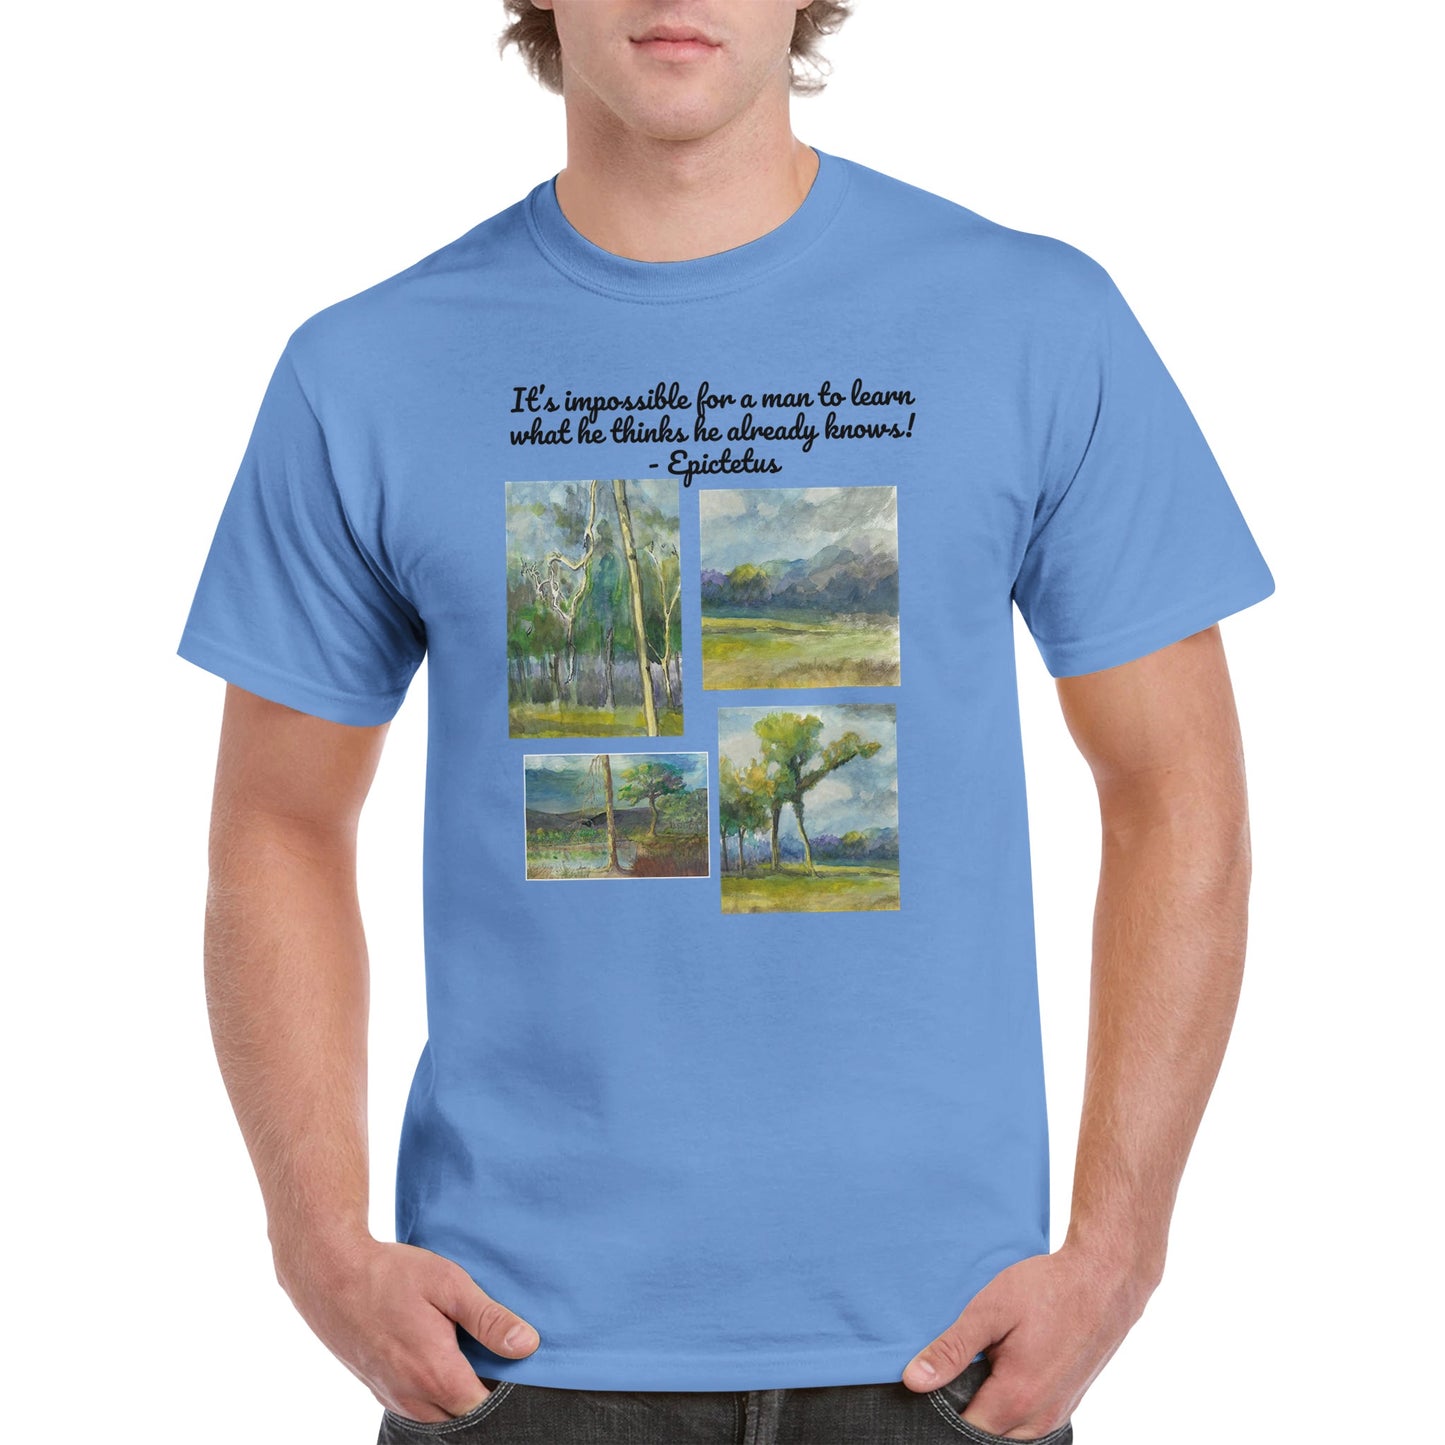 A Carolina Blue heavyweight Unisex Crewneck cotton t-shirt with original artwork It’s impossible for a man to learn what he thinks he already knows! on the front from WhatYa Say Apparel worn by blonde-haired male front view.